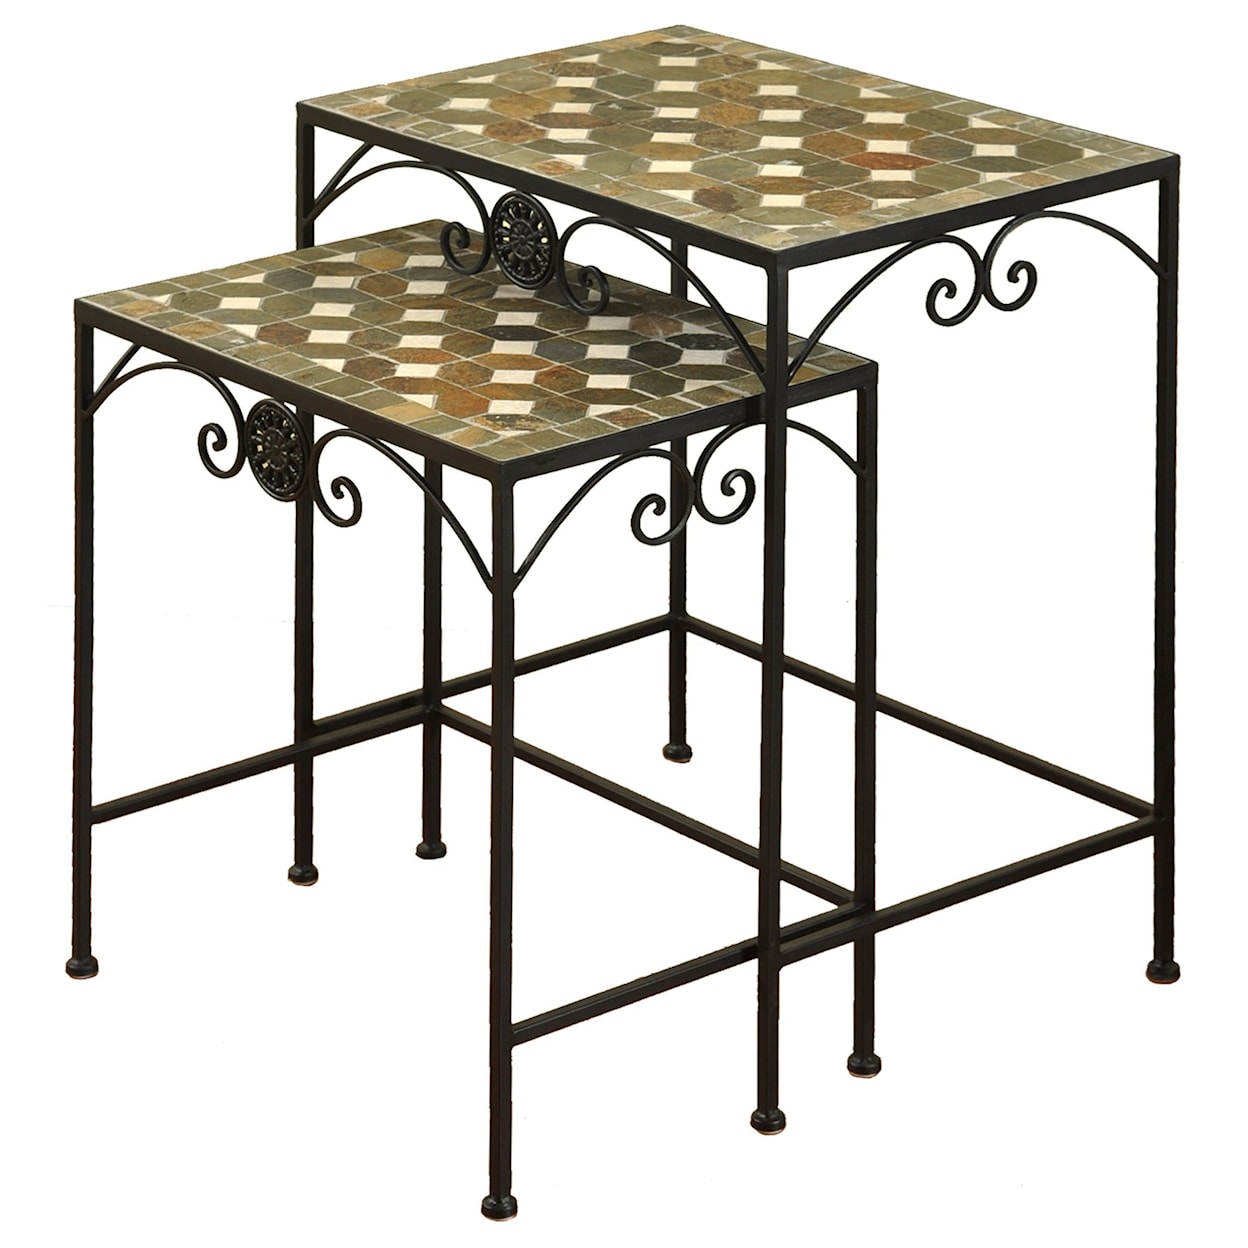 StyleCraft Occasional Tables Set of Two Nesting Tables